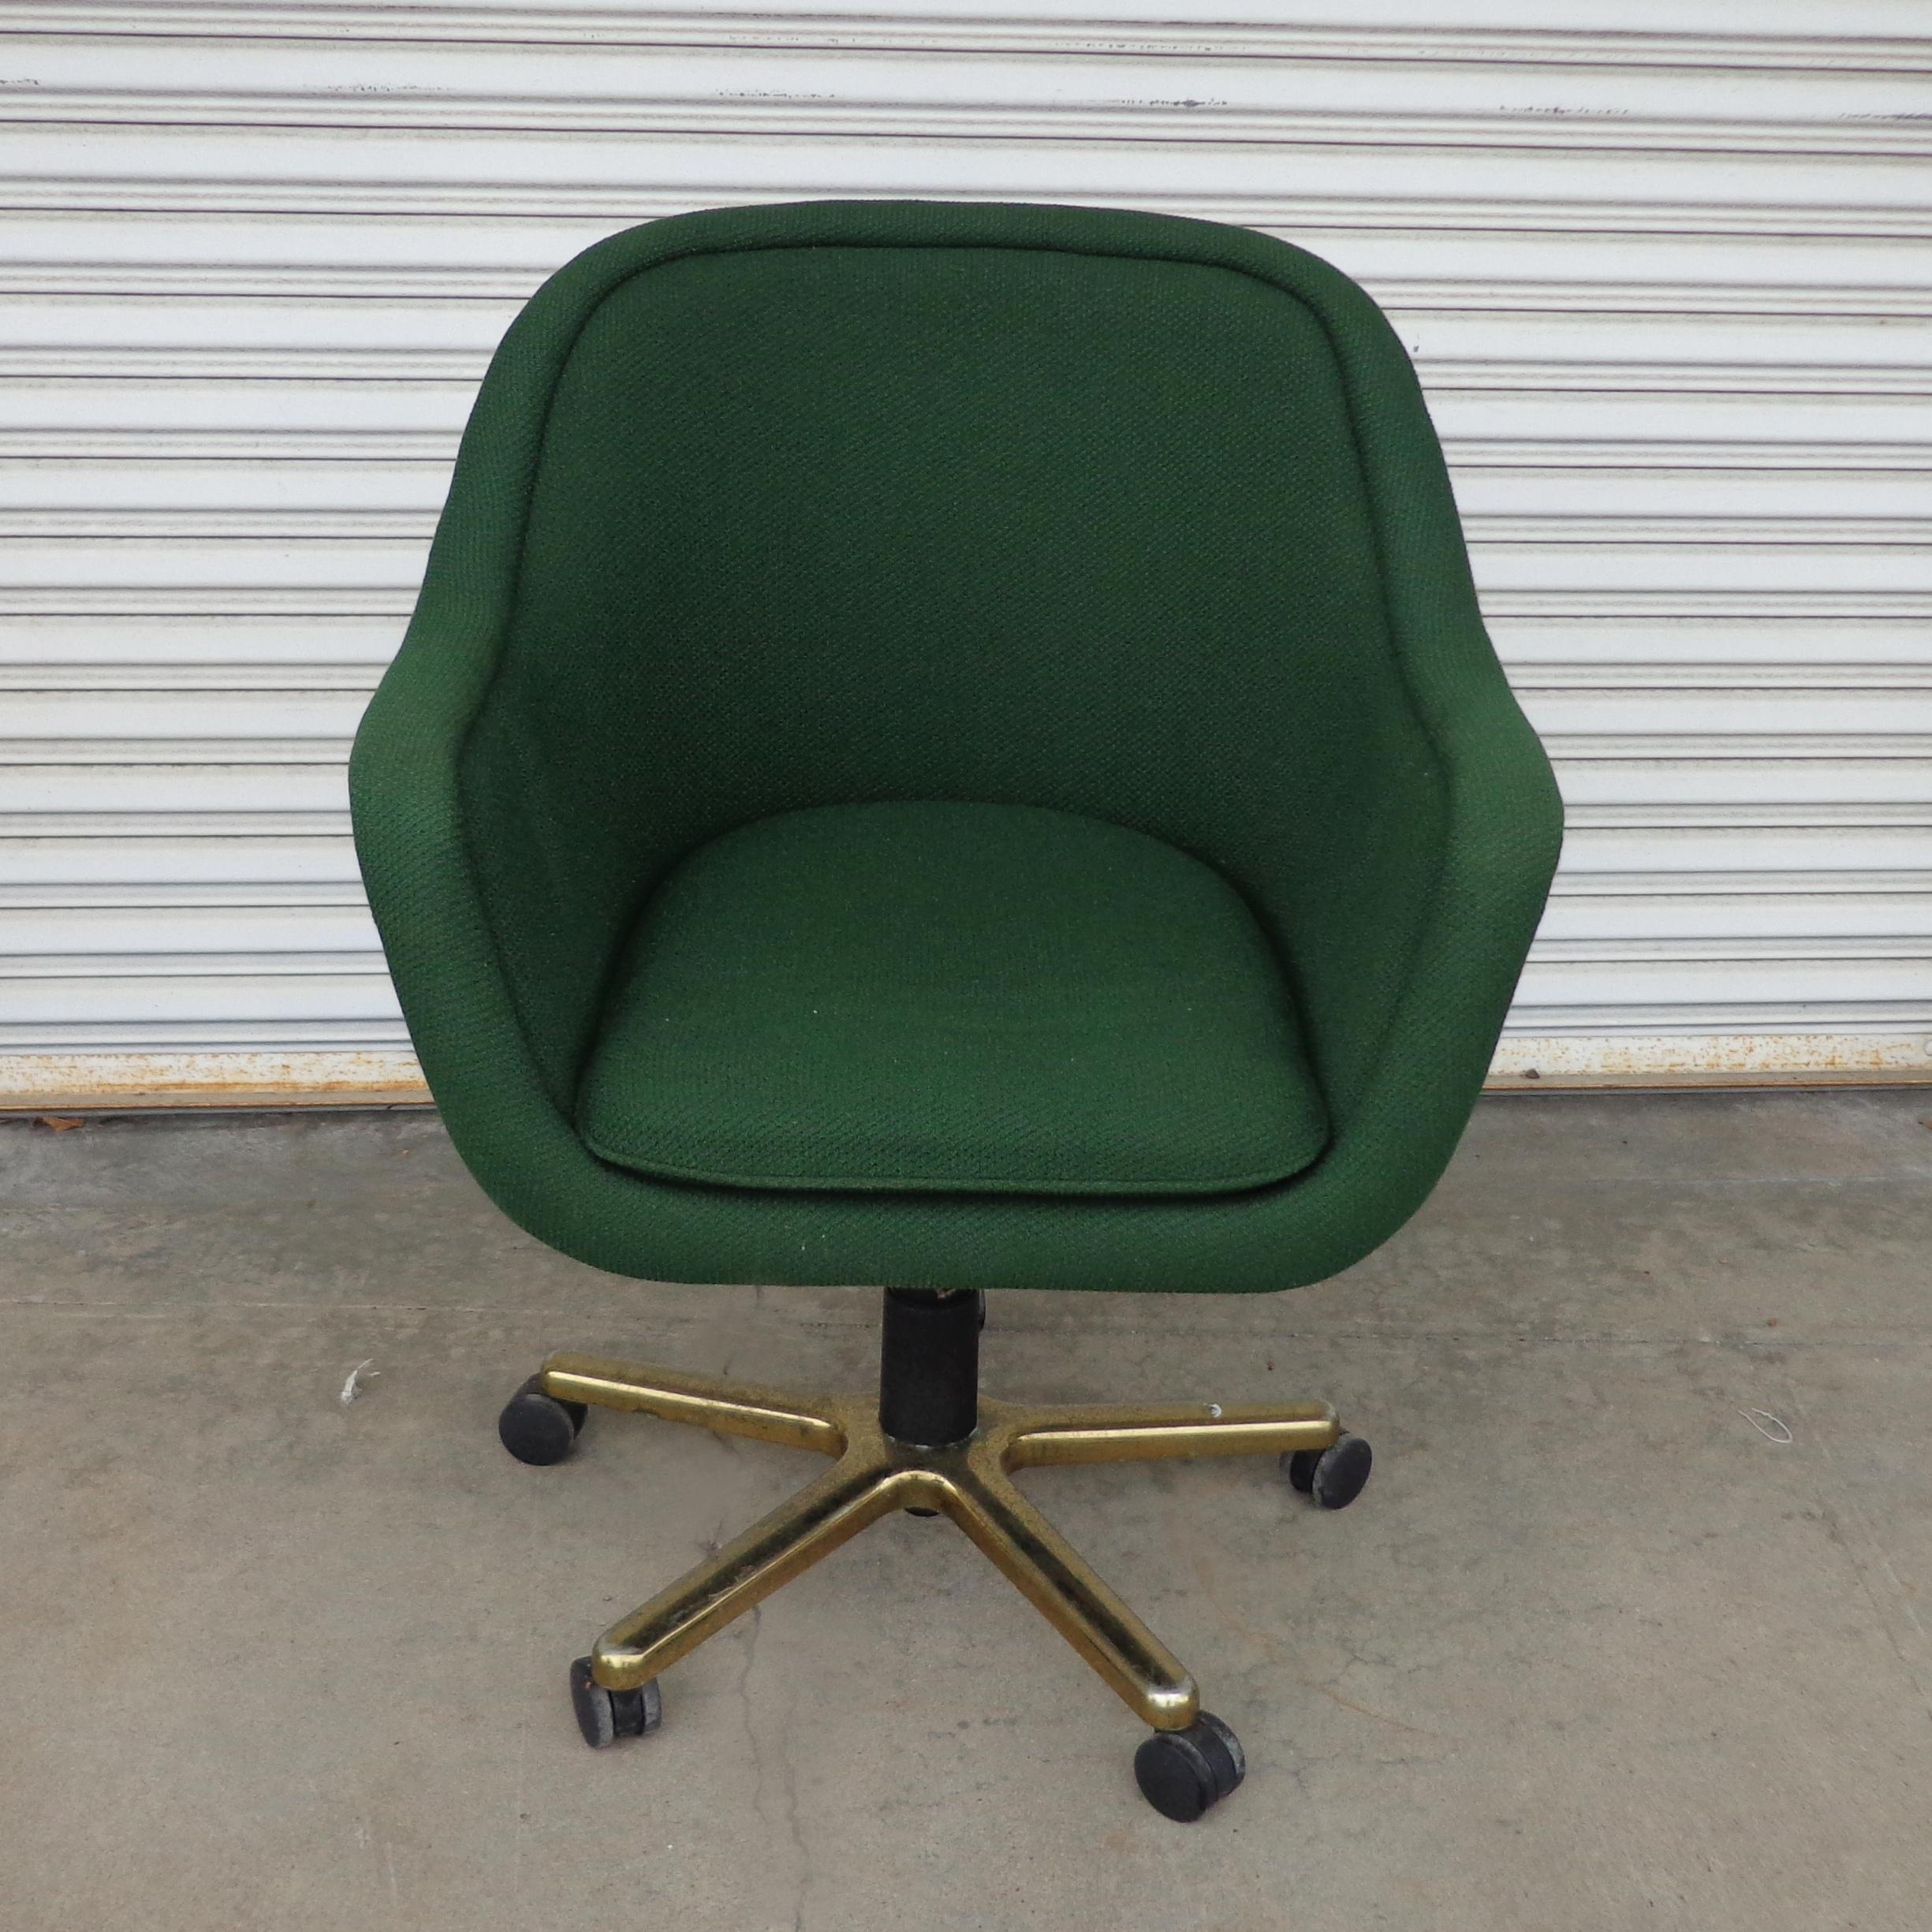 Bumper desk chair by Ward Bennett for Brickel and Associates


Ward Bennett for Brickel and Associates task chair

Bronze 4-star swivel conference room chair in a green tweed fabric.
10 Available 

Chair swivels and is height adjustable.